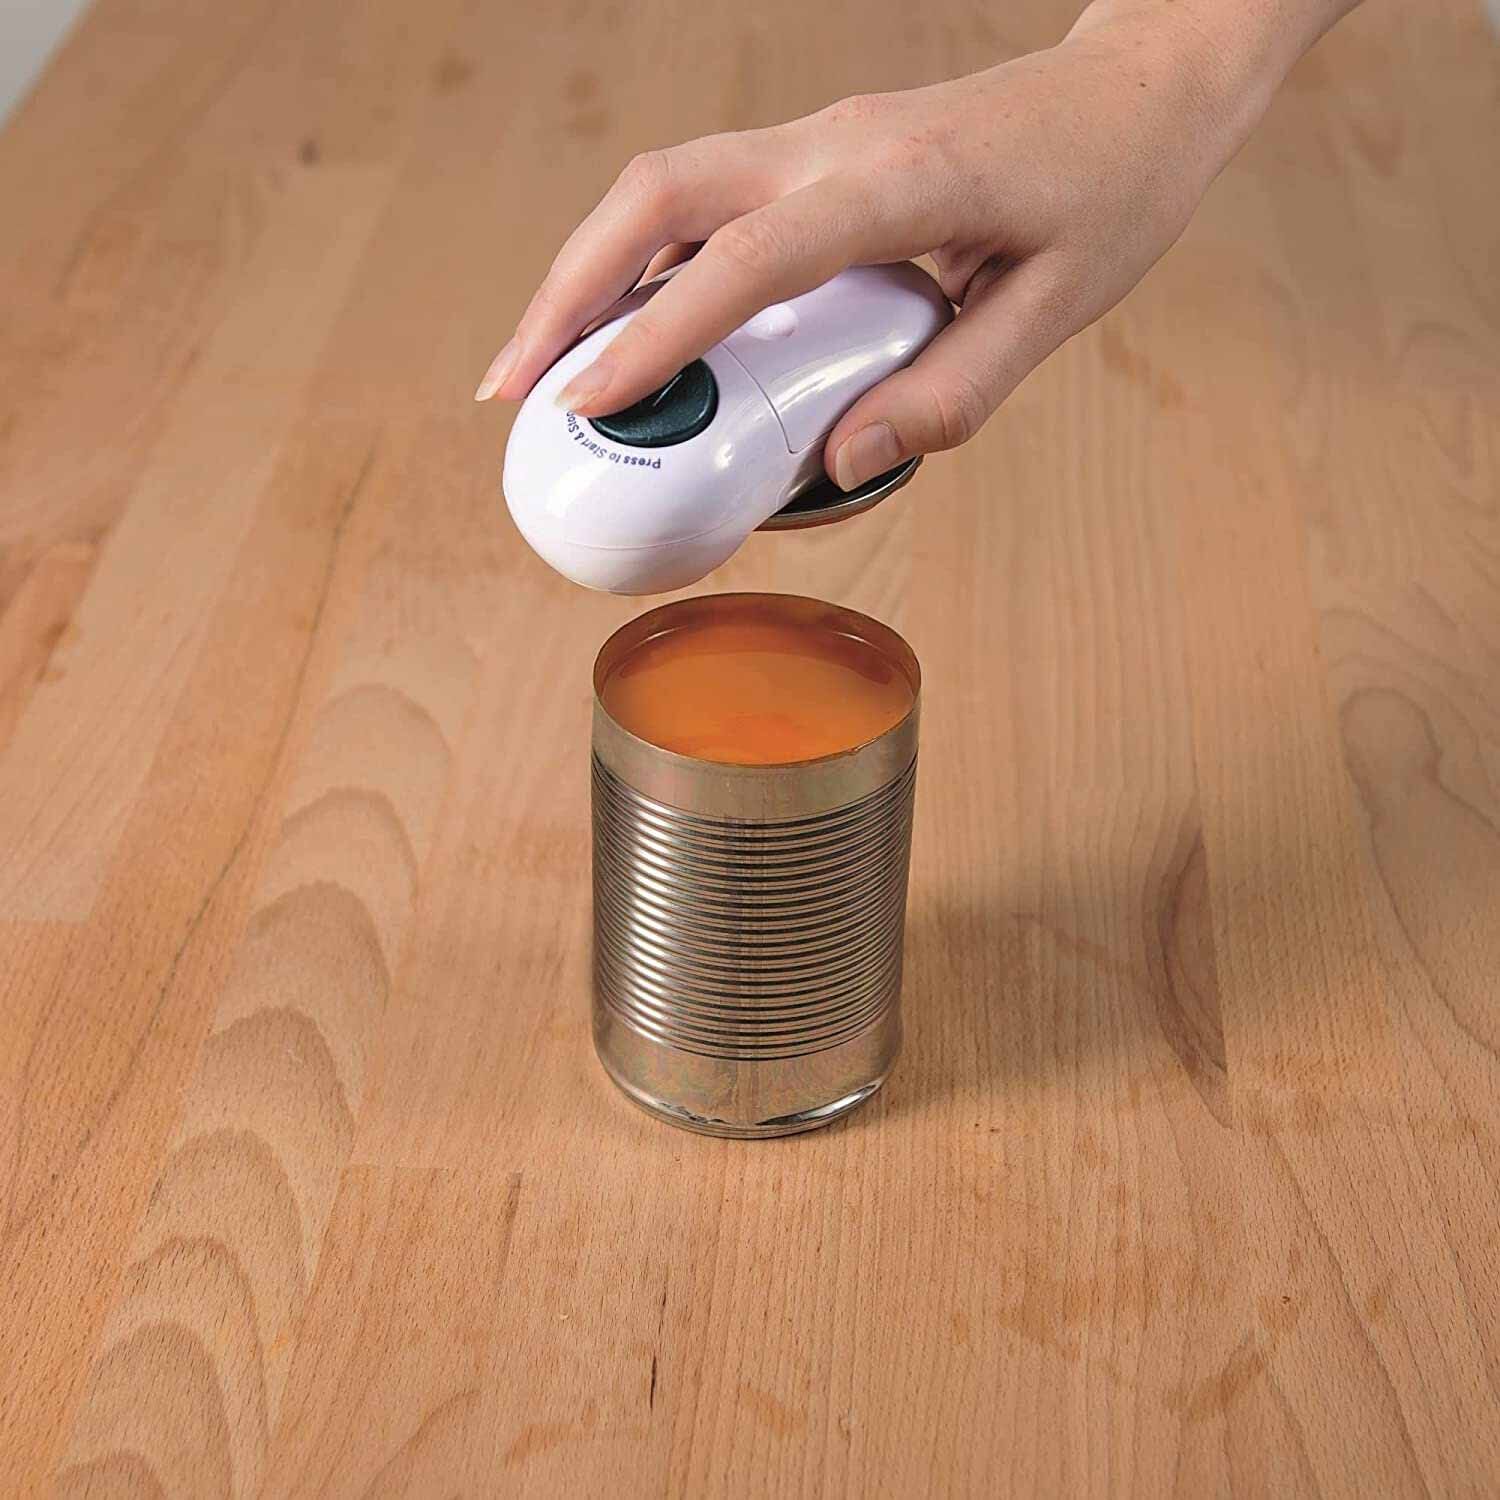 JML Hands Free Automatic Can Opener